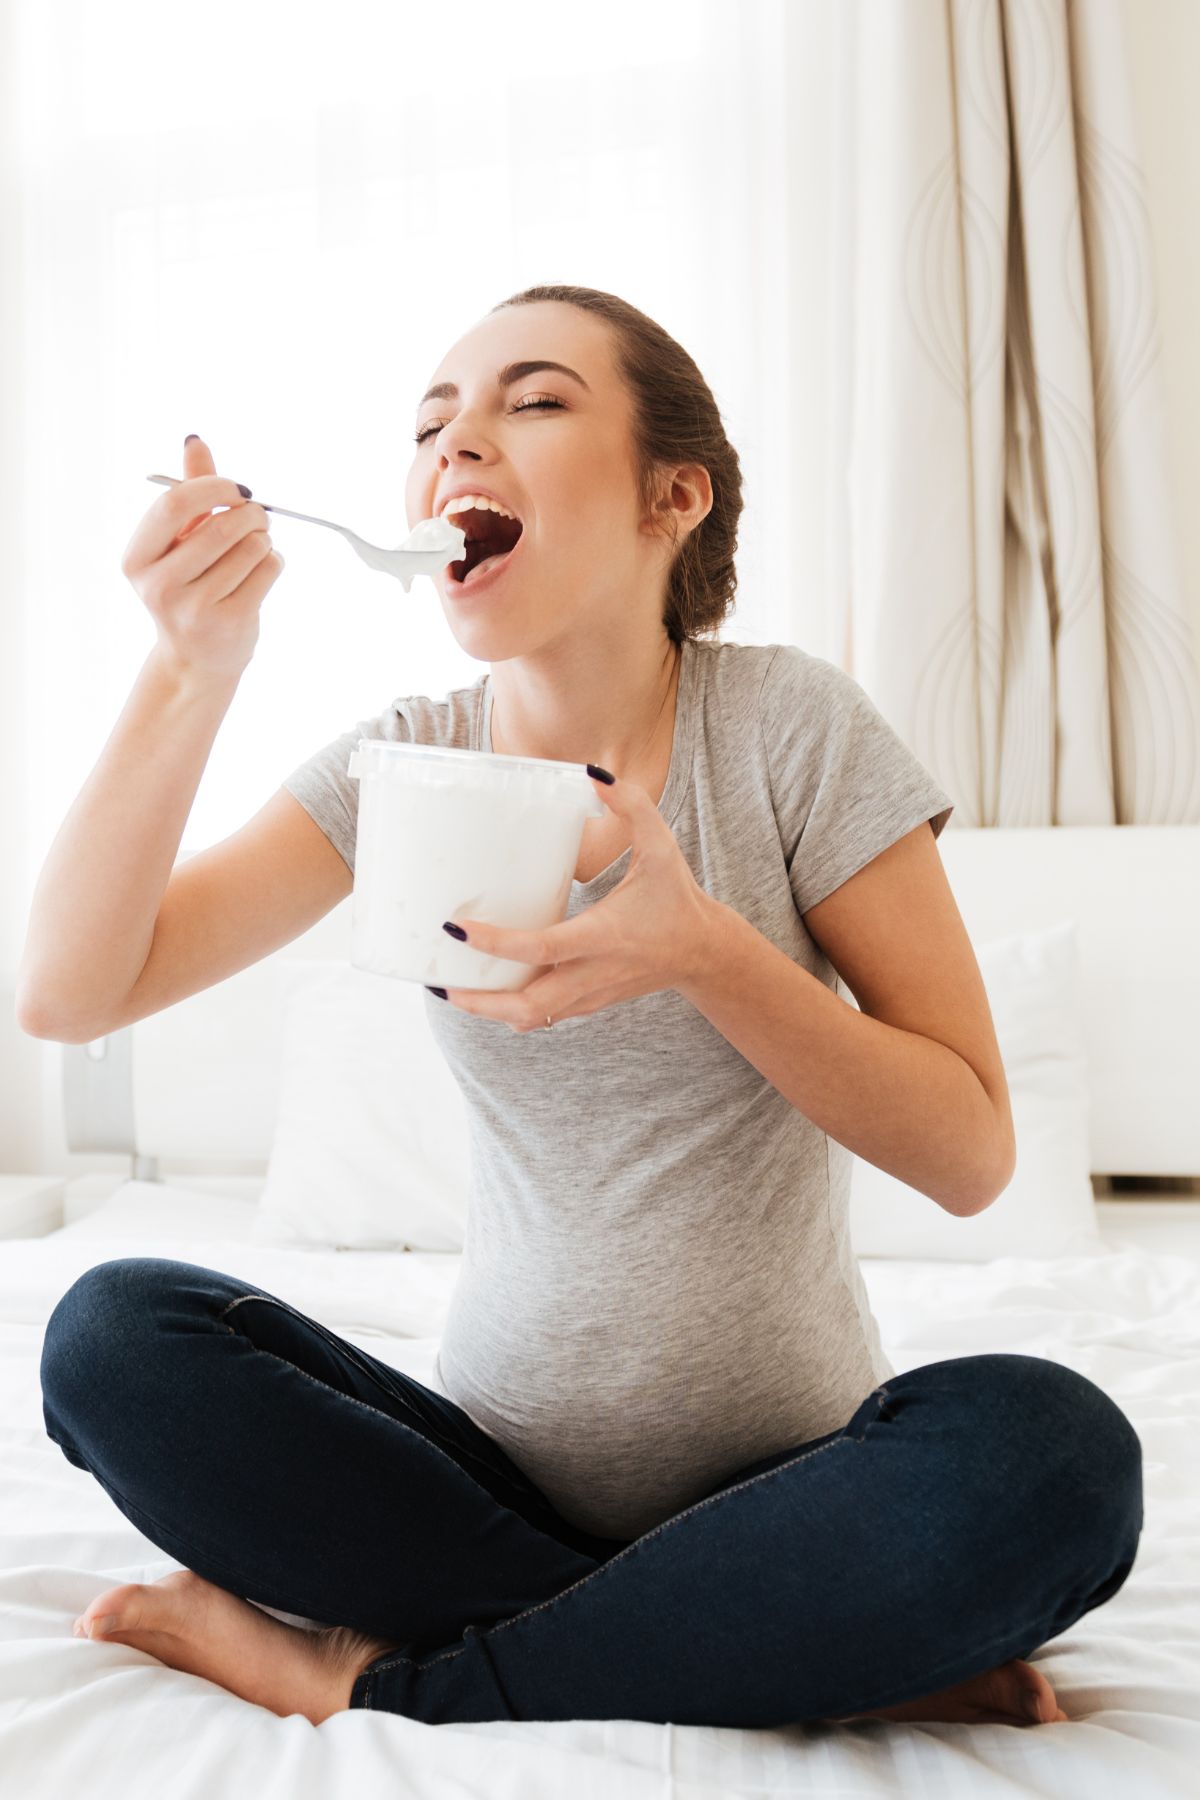 Pregnant woman sits on bed and holds a tub of white cream in one hand and a spoon with the cream on it in another.